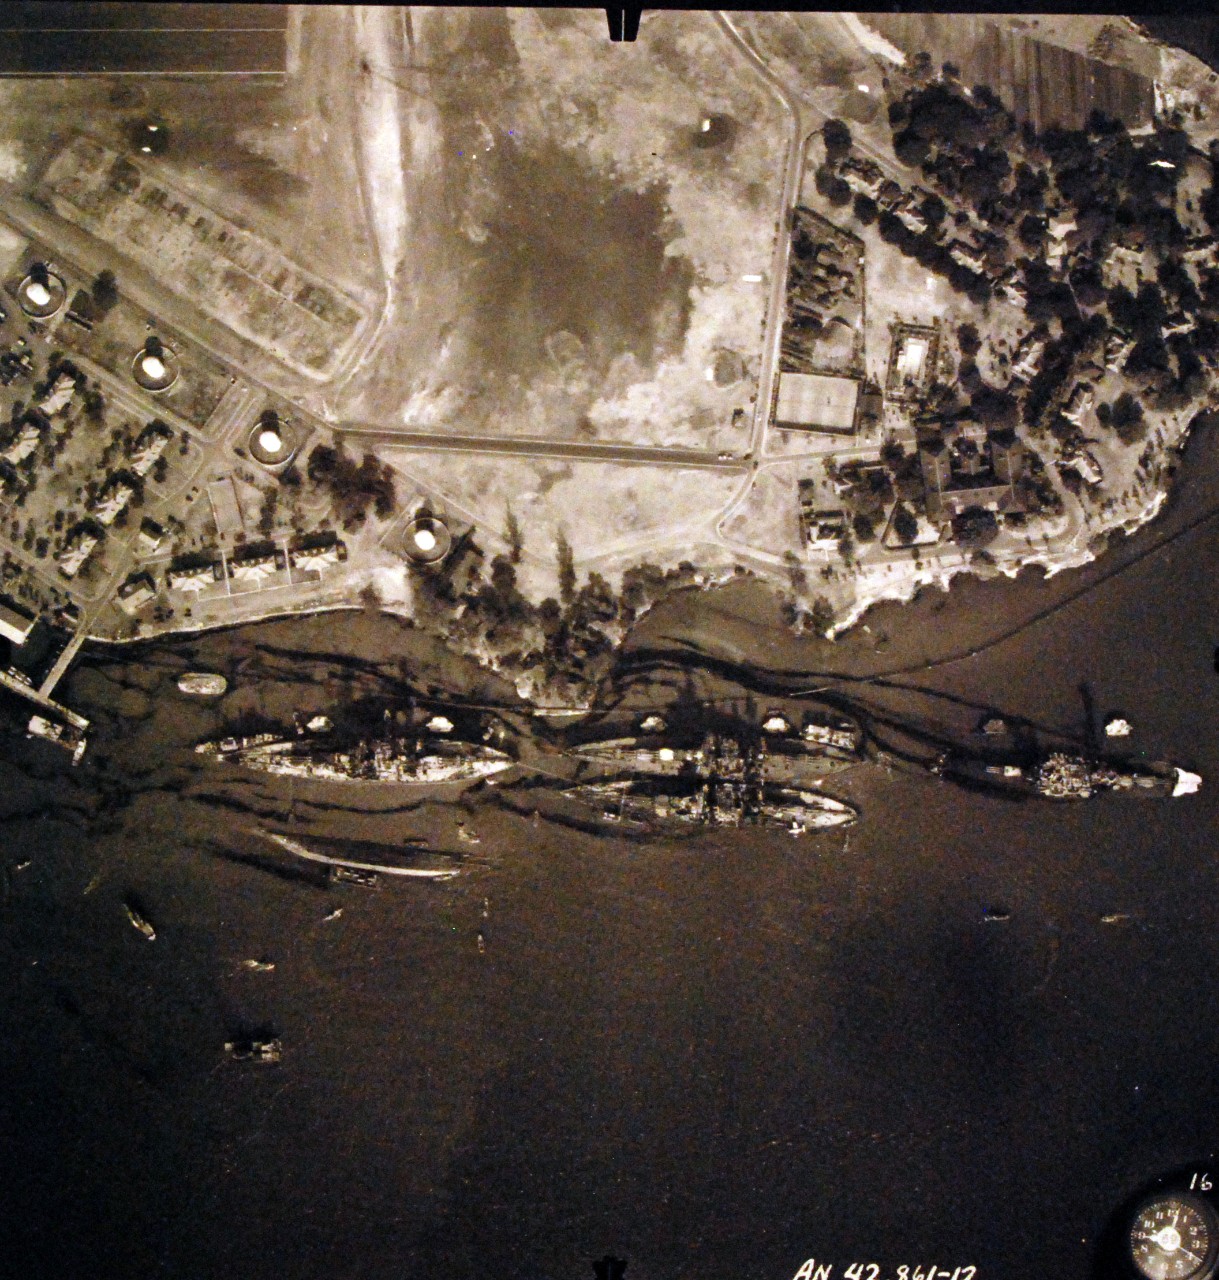 80-G-387573:  Pearl Harbor Attack, 7 December 1941.  Aerial view of "Battleship Row" moorings on the southern side of Ford Island, 10 December 1941, showing damage from the Japanese raid three days earlier.  Diagonally, from left center to lower right are: USS Maryland (BB-46), lightly damaged, with the capsized USS Oklahoma (BB-37) outboard. A barge is alongside Oklahoma, supporting rescue efforts. USS Tennessee (BB-43), lightly damaged, with the sunken USS West Virginia (BB-48) outboard. USS Arizona (BB-39), sunk, with her hull shattered by the explosion of the magazines below the two forward turrets. Note dark oil streaks on the harbor surface, originating from the sunken battleships. Photographed by VJ-1 at an altitude of 3,000 feet and released November 9, 1950.  U.S. Navy photograph, now in the collections of the National Archives.     (9/22/2015).